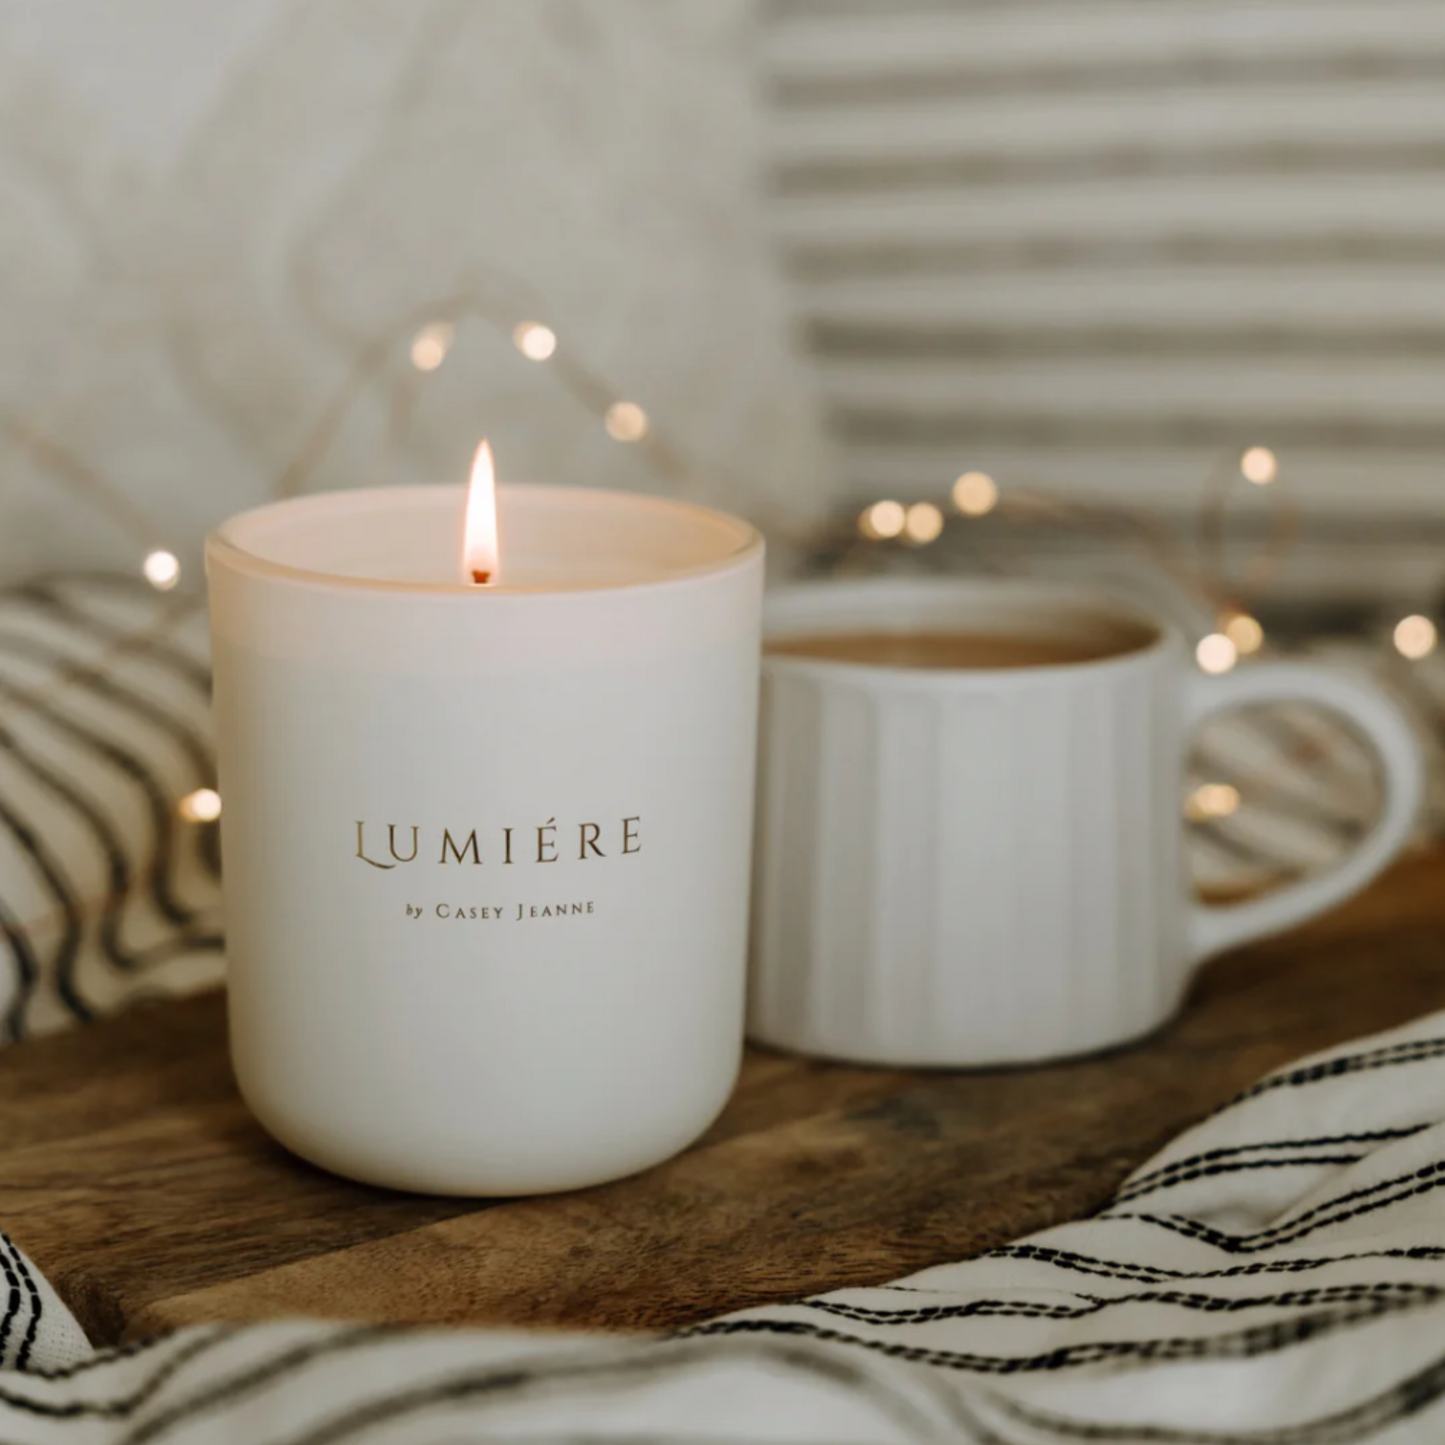 Lumiere by Casey Jeanne Sea Island Cotton Candle